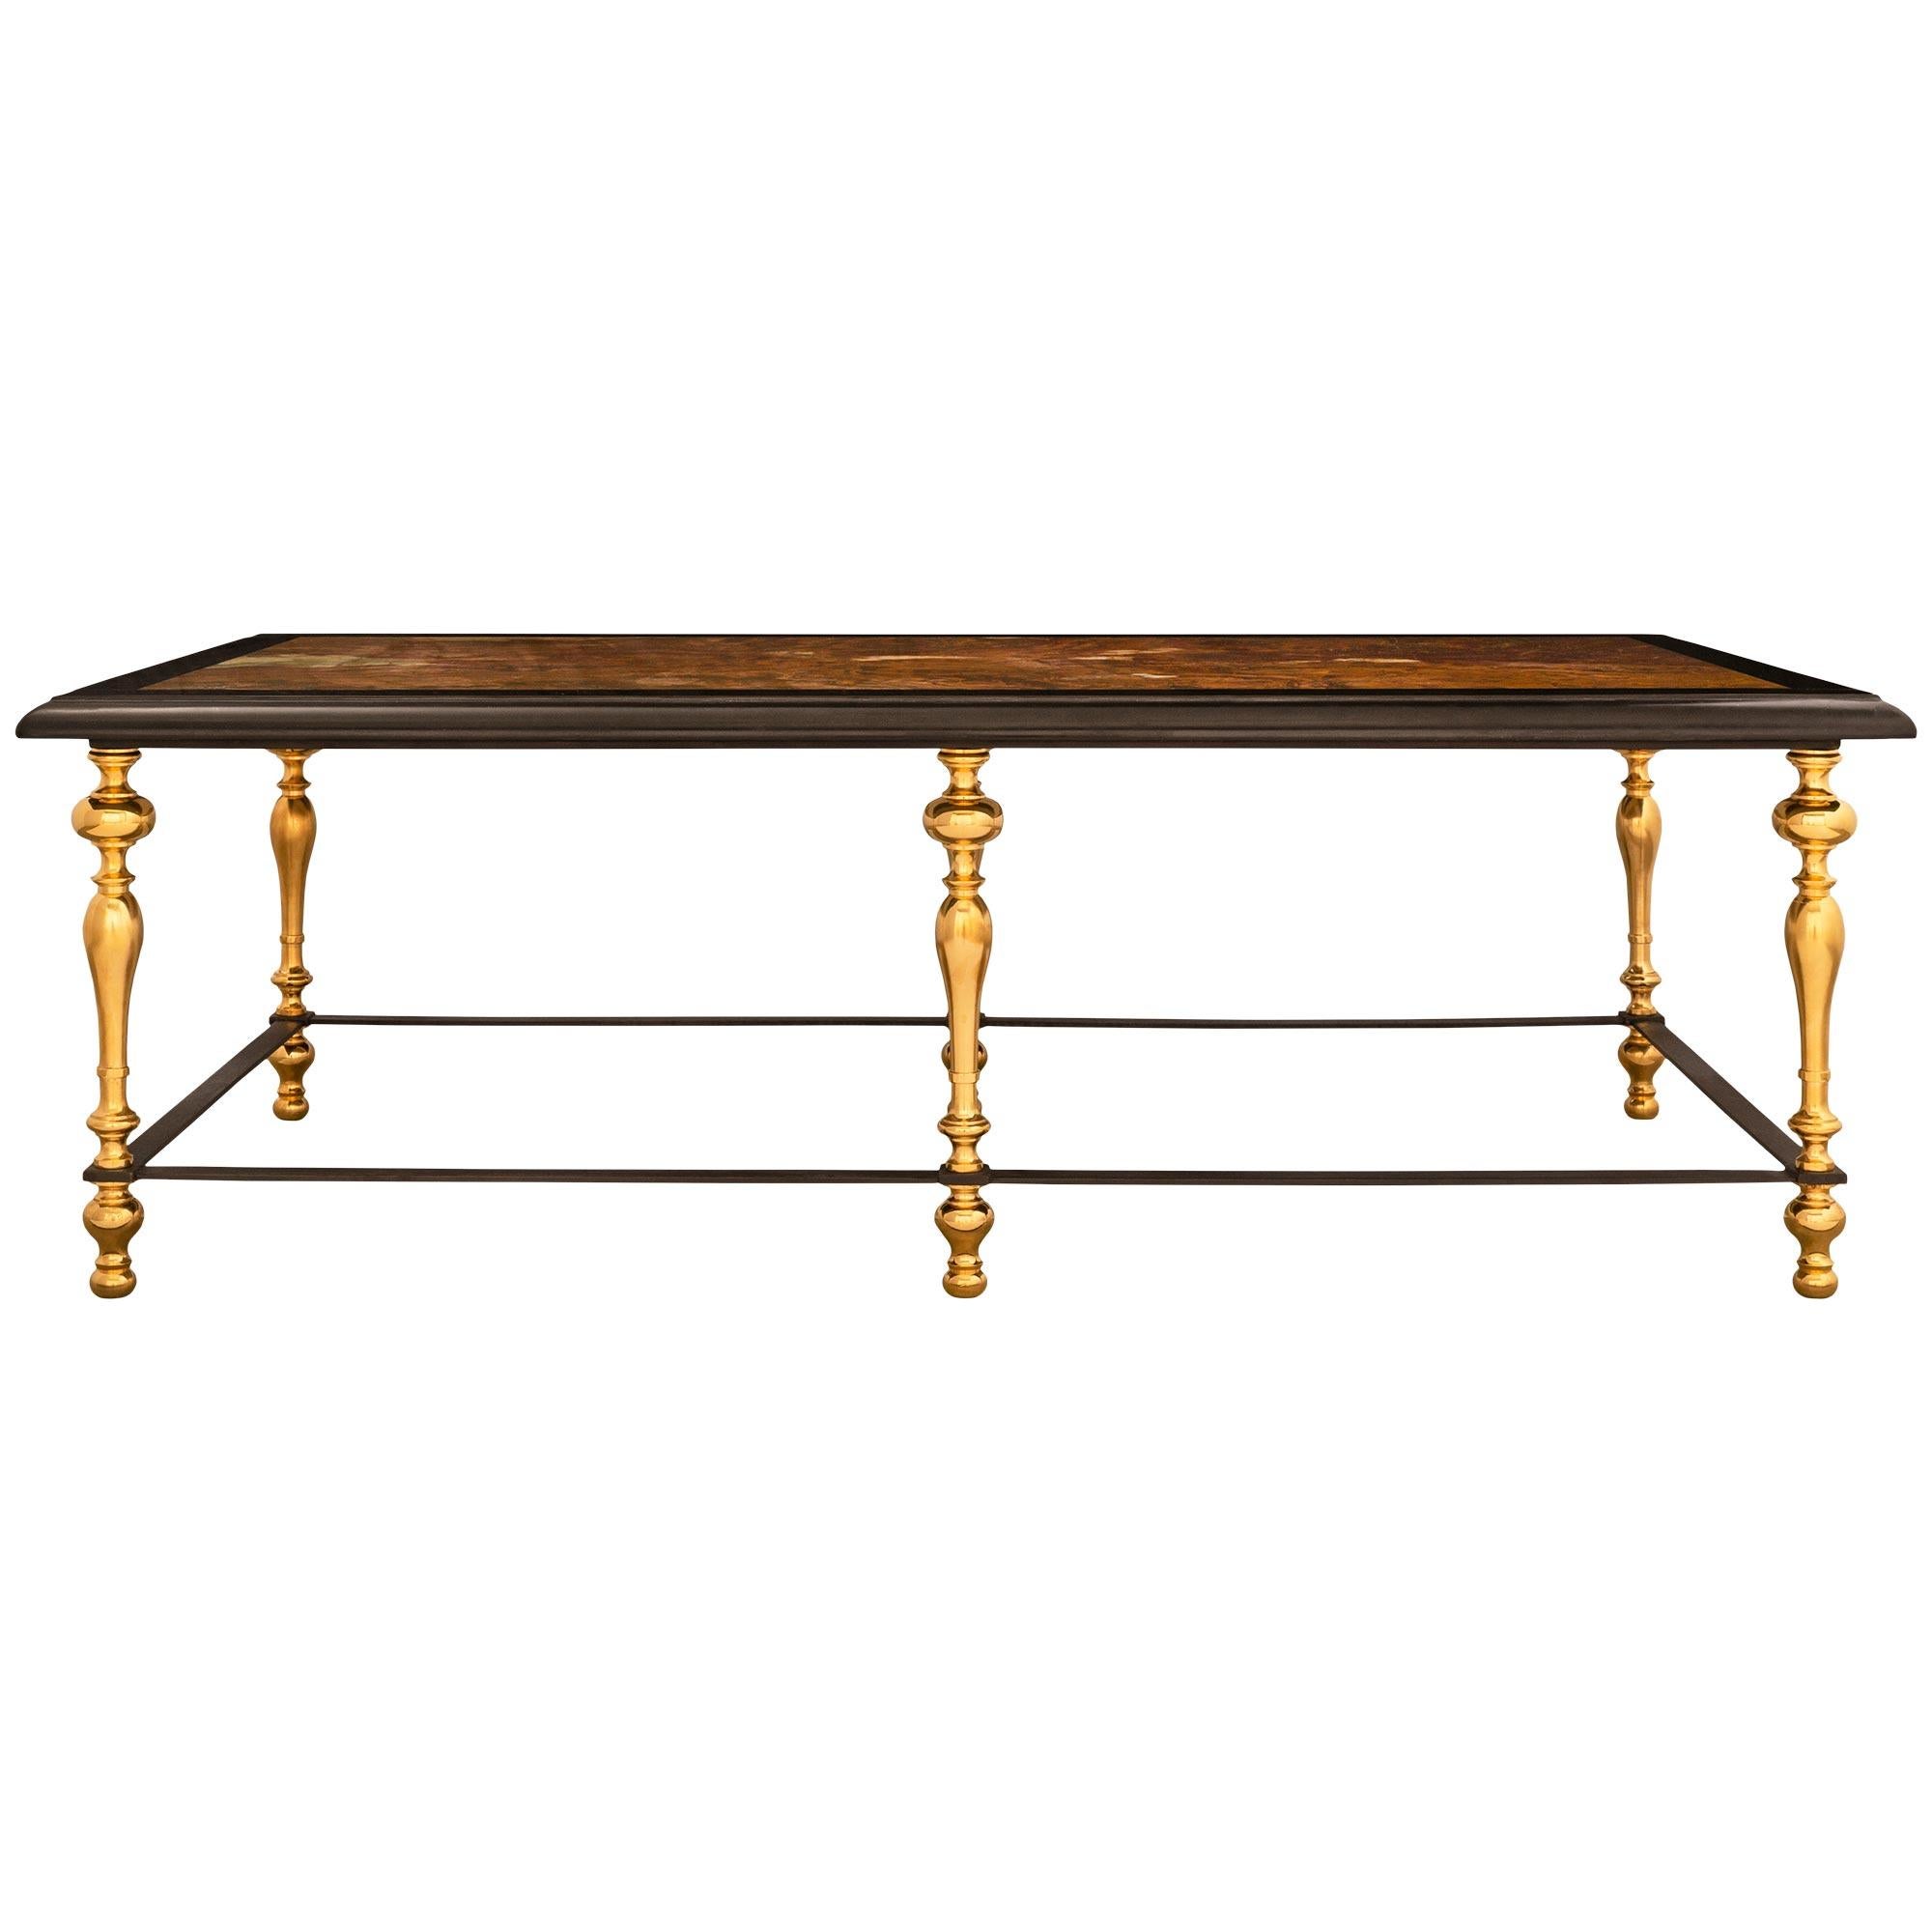 Continental 19th Century Louis XIV St. Bronze, Marble, and Ormolu Coffee Table For Sale 4